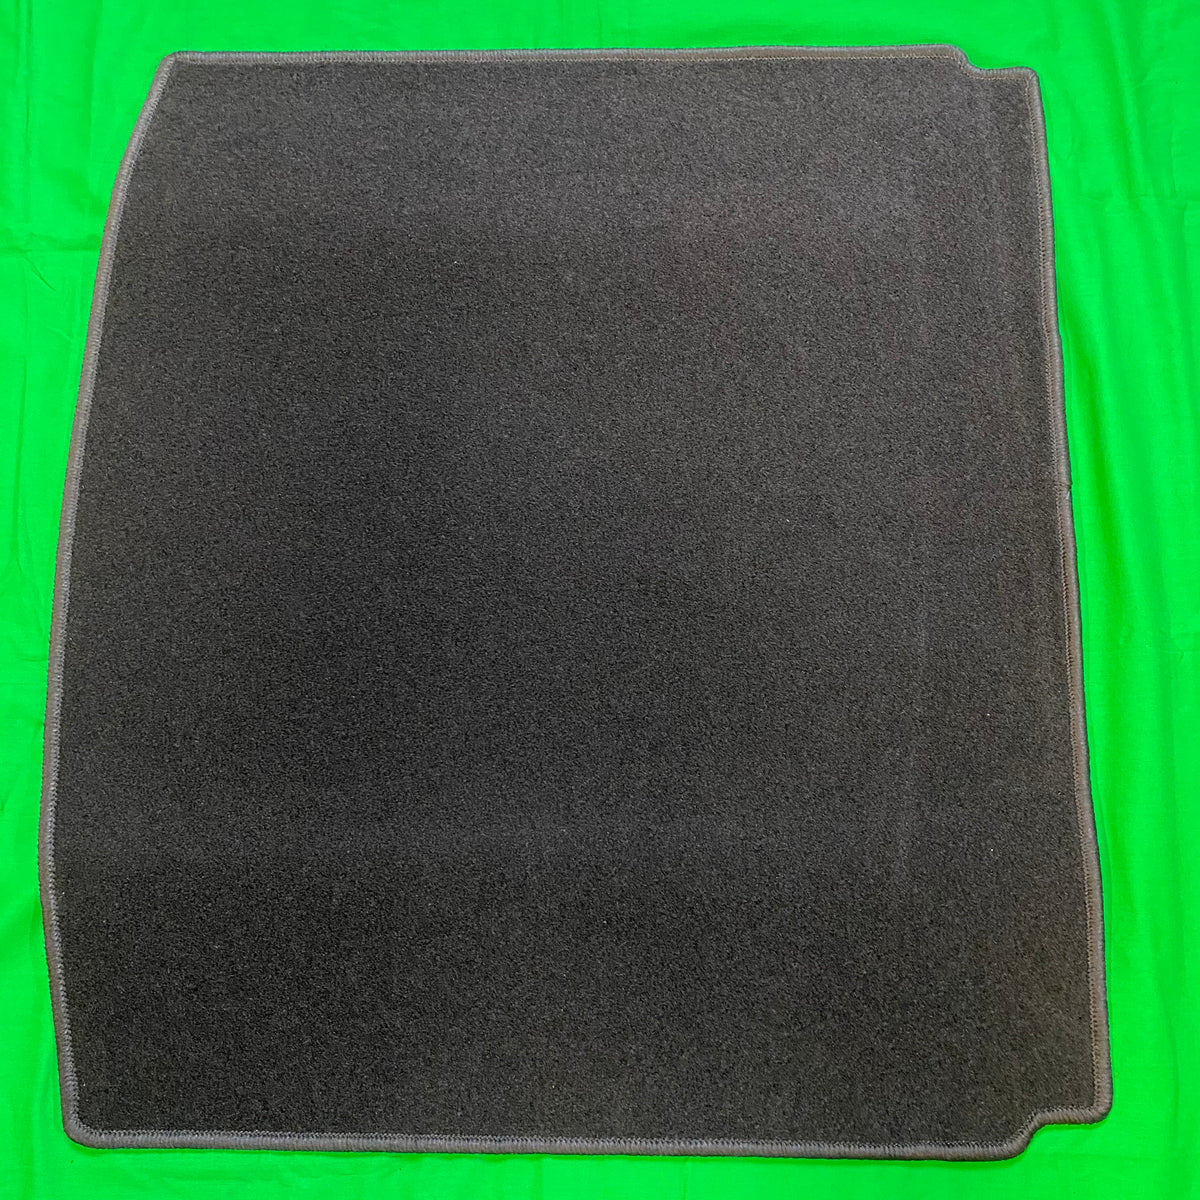 MG ZS, MG ZST, MG ZSEV Genuine Boot Mat (CARPET) - Black With Logo | ARG Parts & Accessories.